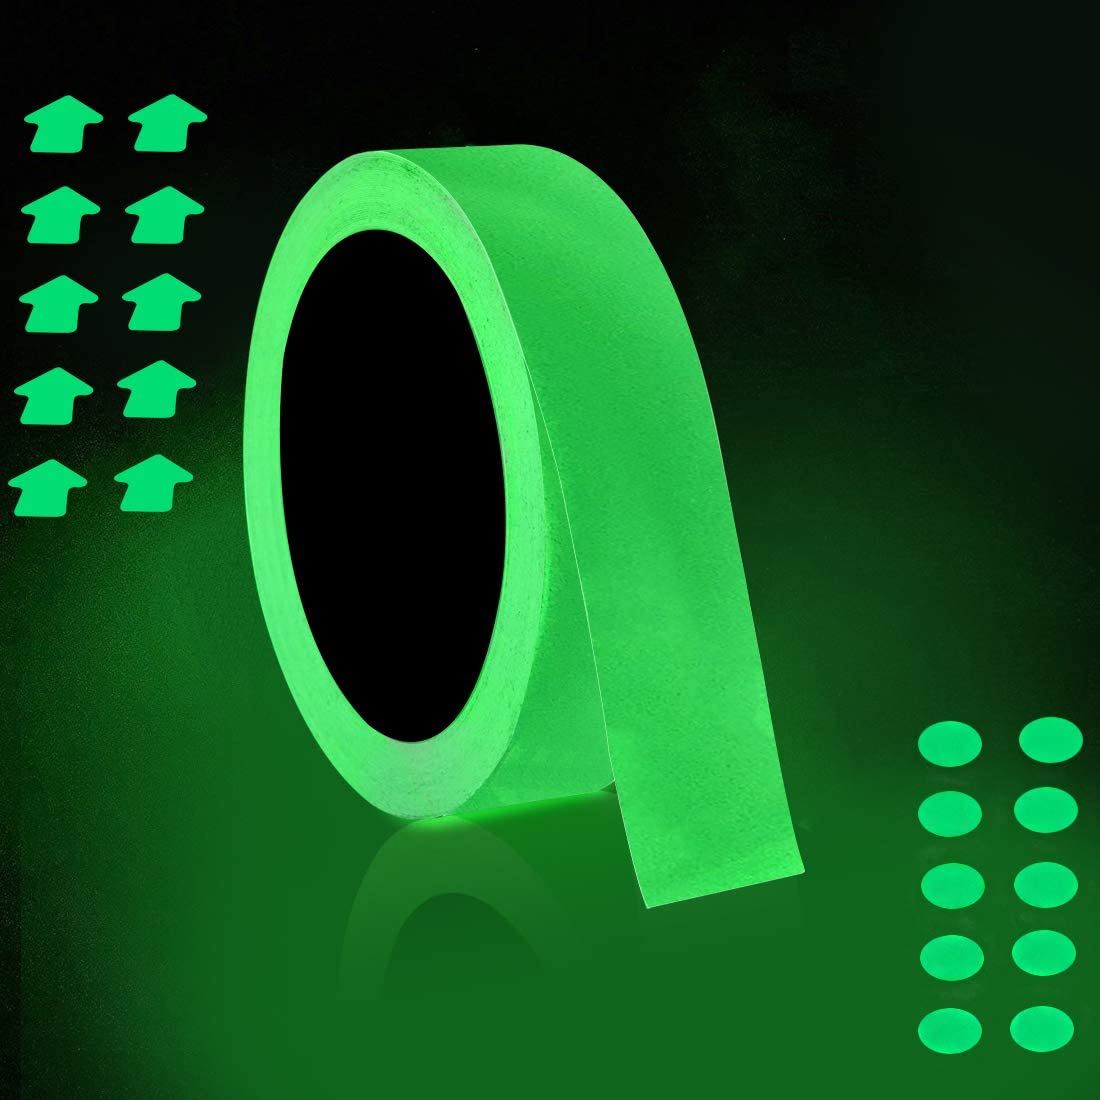 Industrial Grade Interior And Exterior Photoluminescent Glow In The Dark Tape